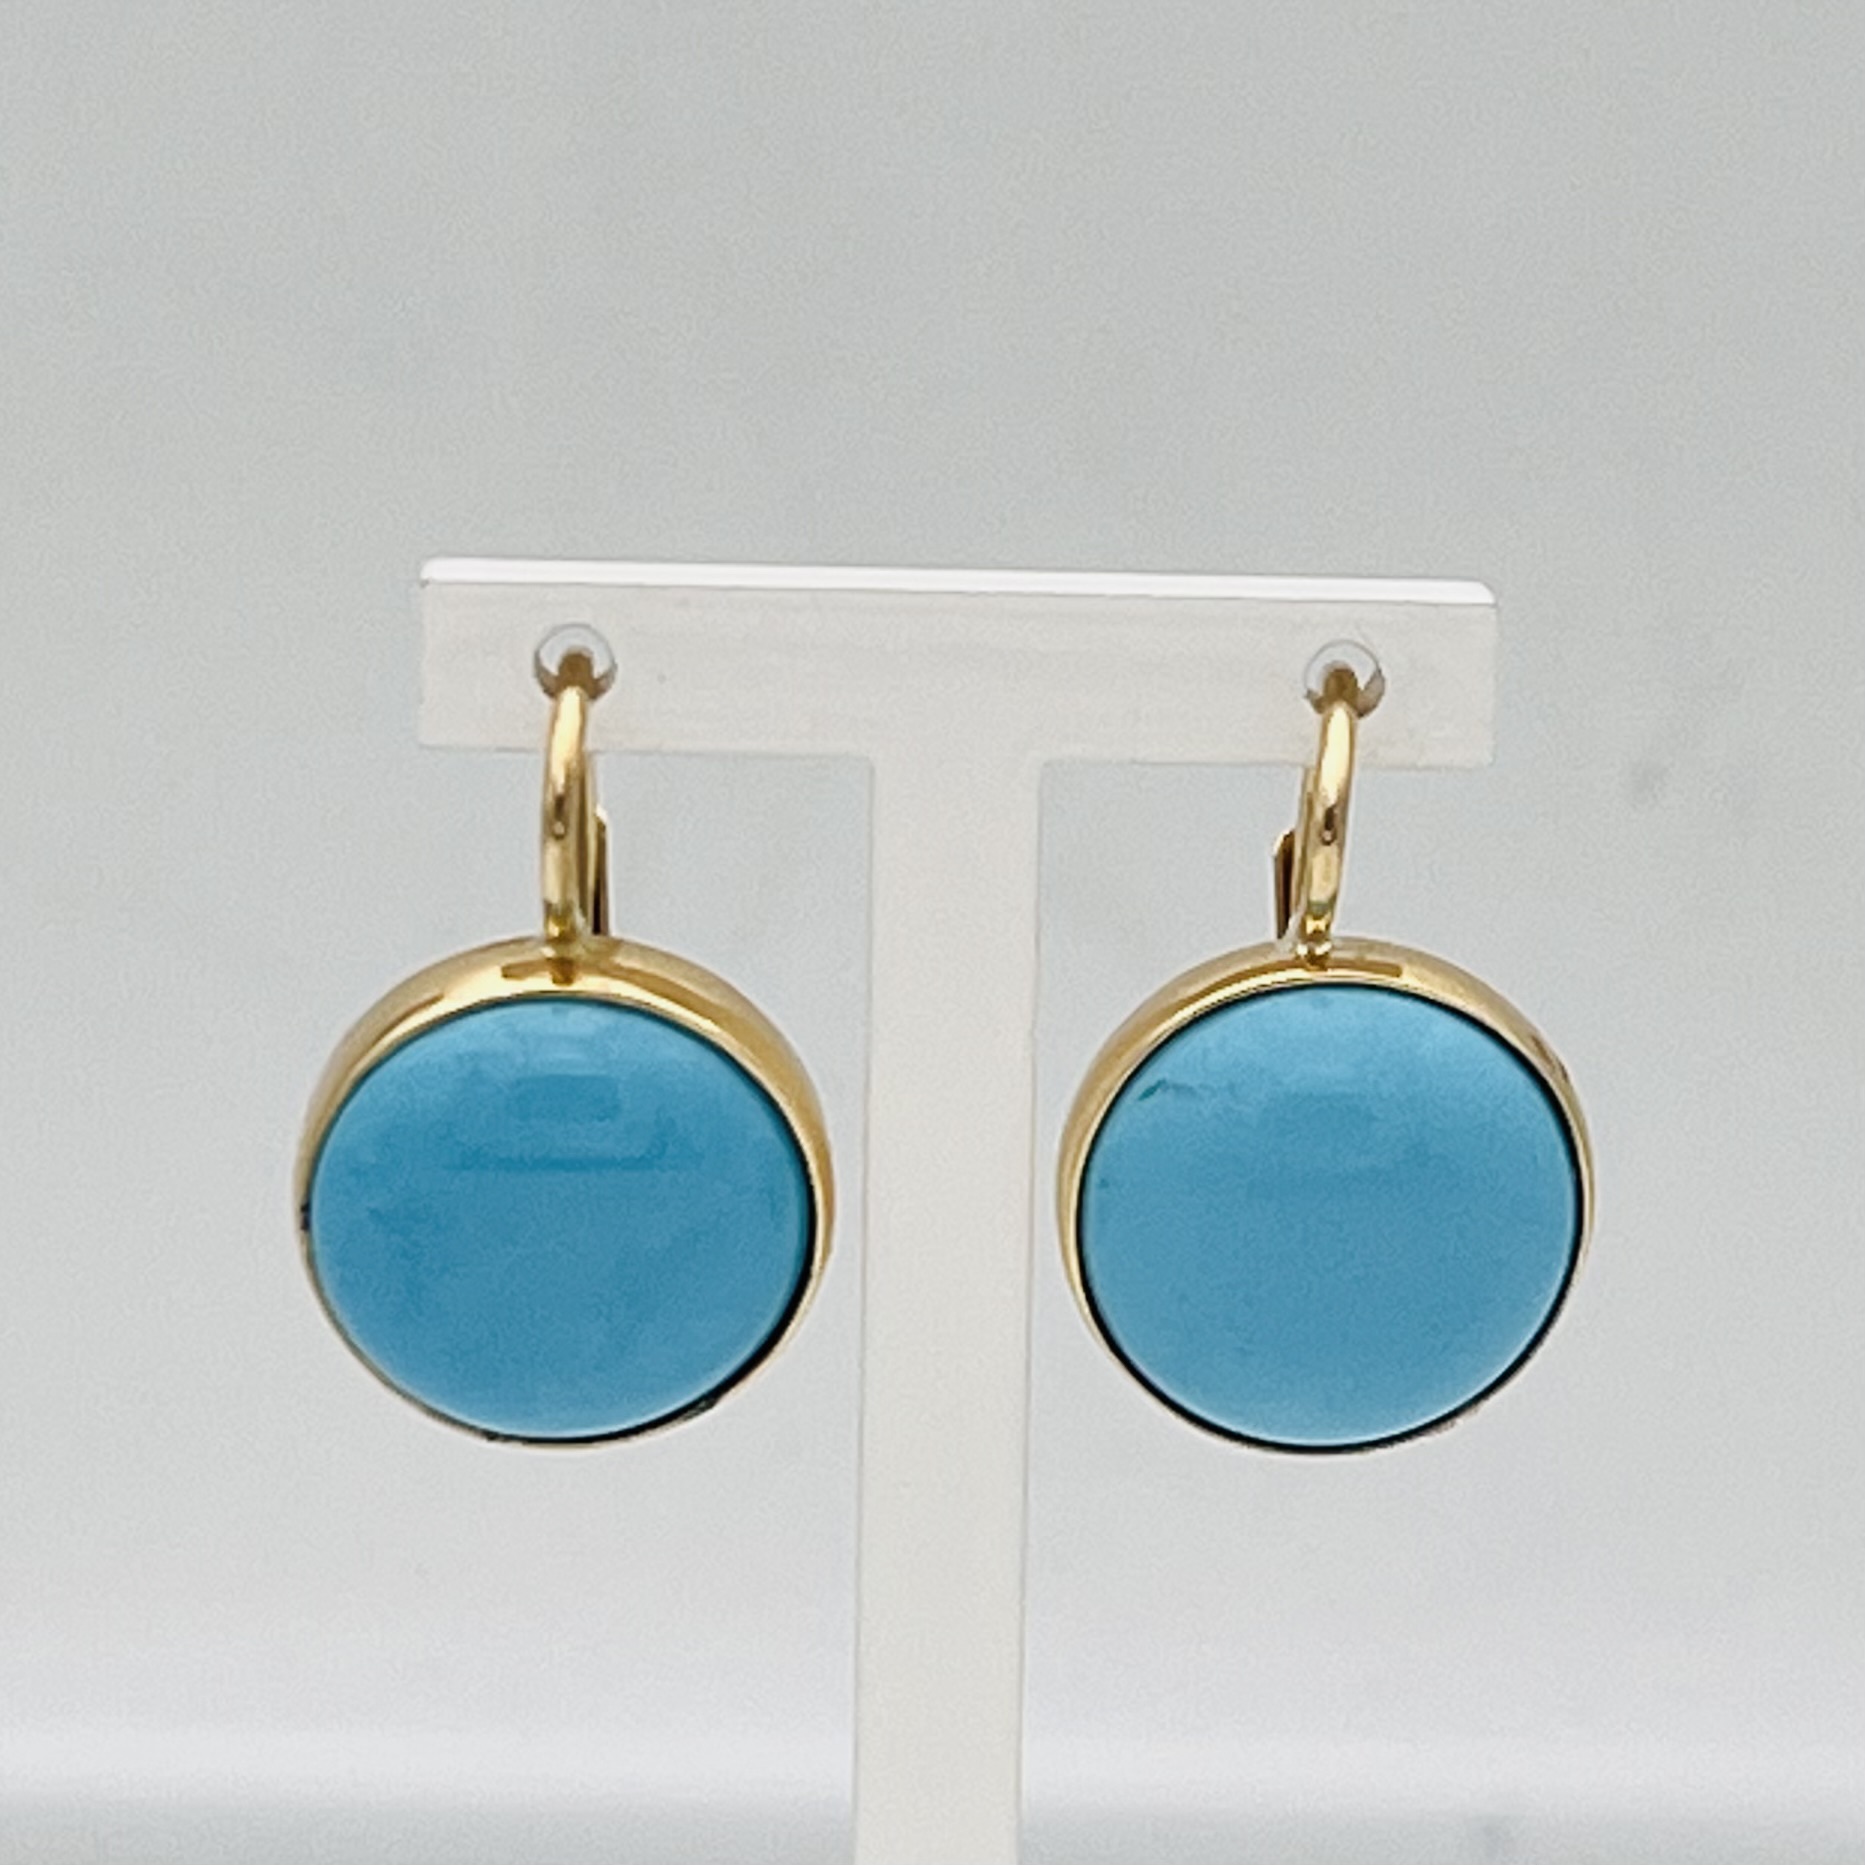 Turquoise and Gold Earrings Art.CORGR6